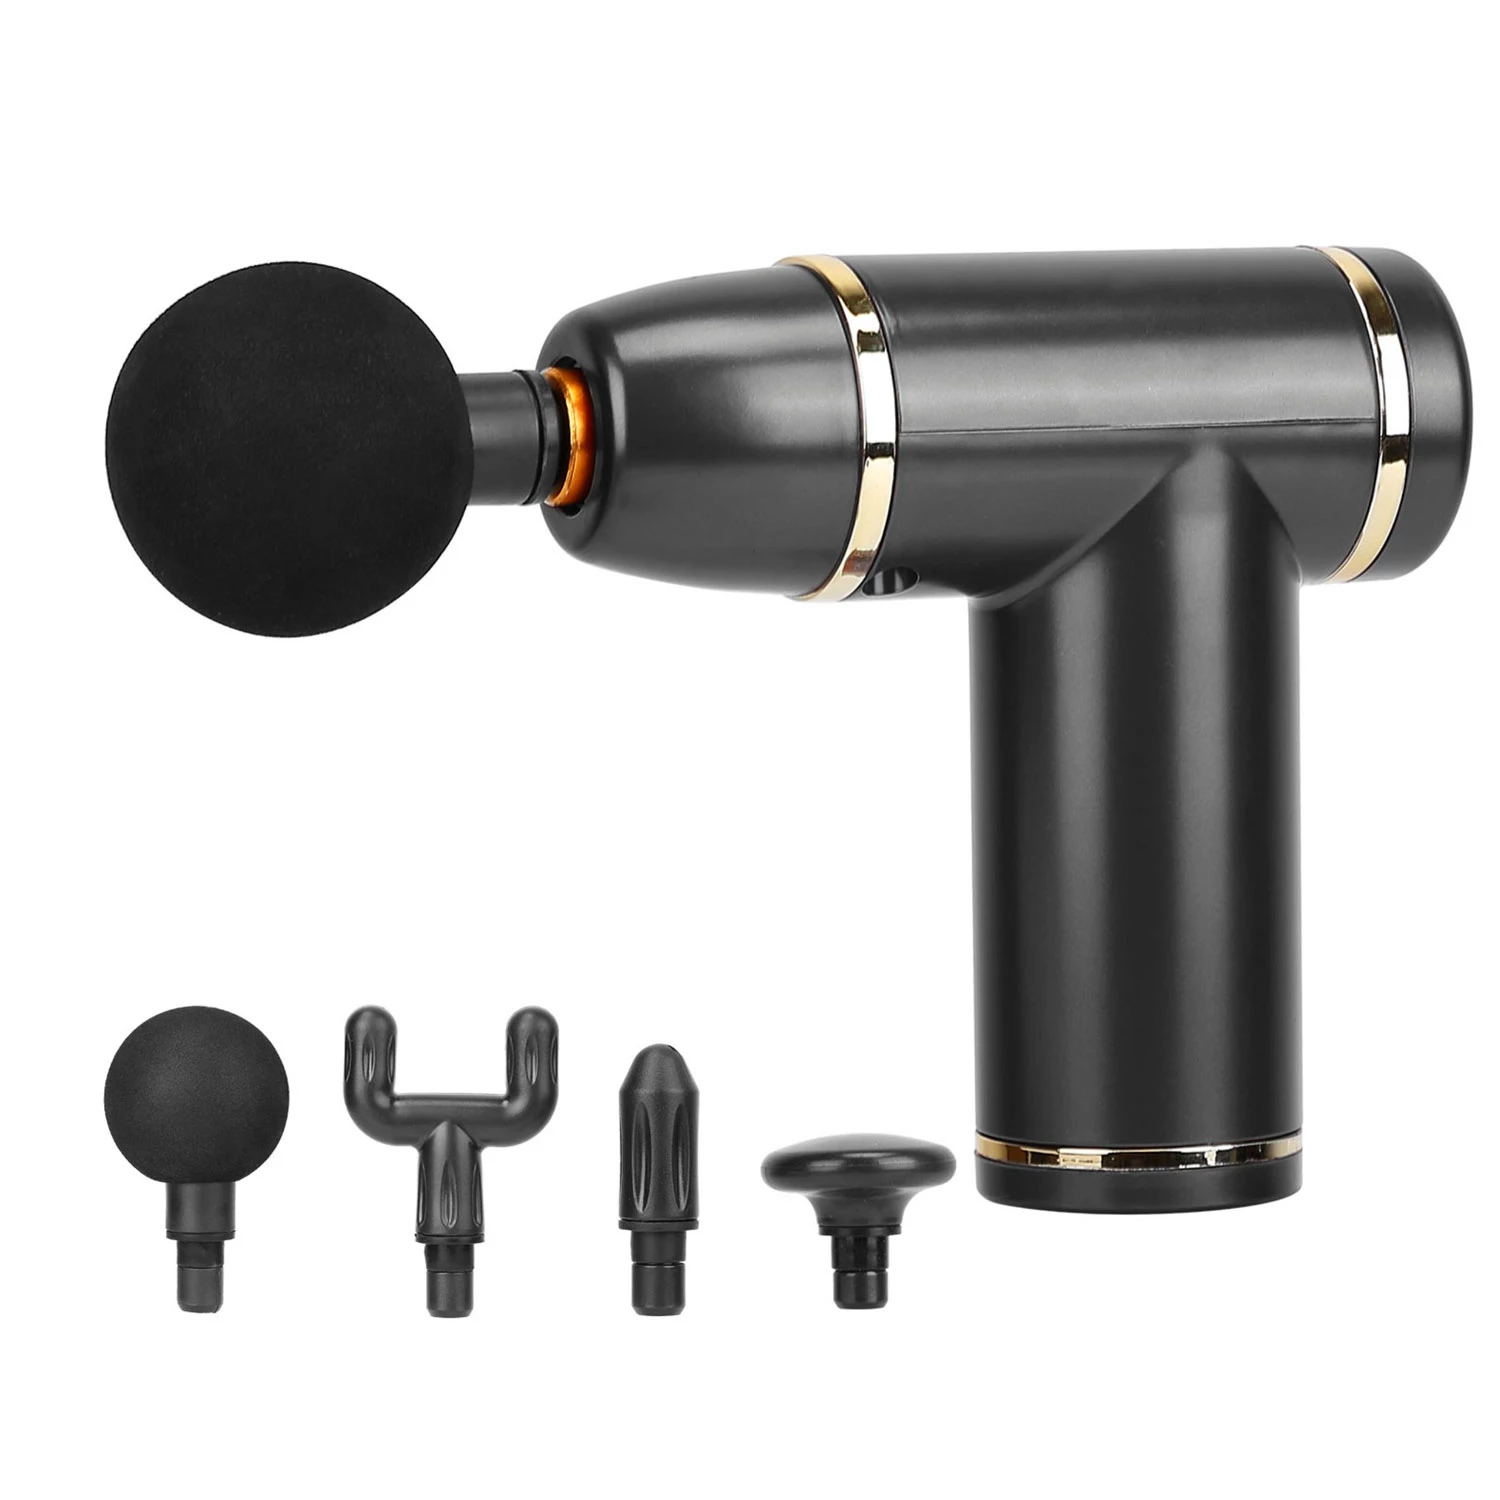 Cordless Percussion Massage Gun - USB-C Rechargeable, 4 Heads, 8 Intensities